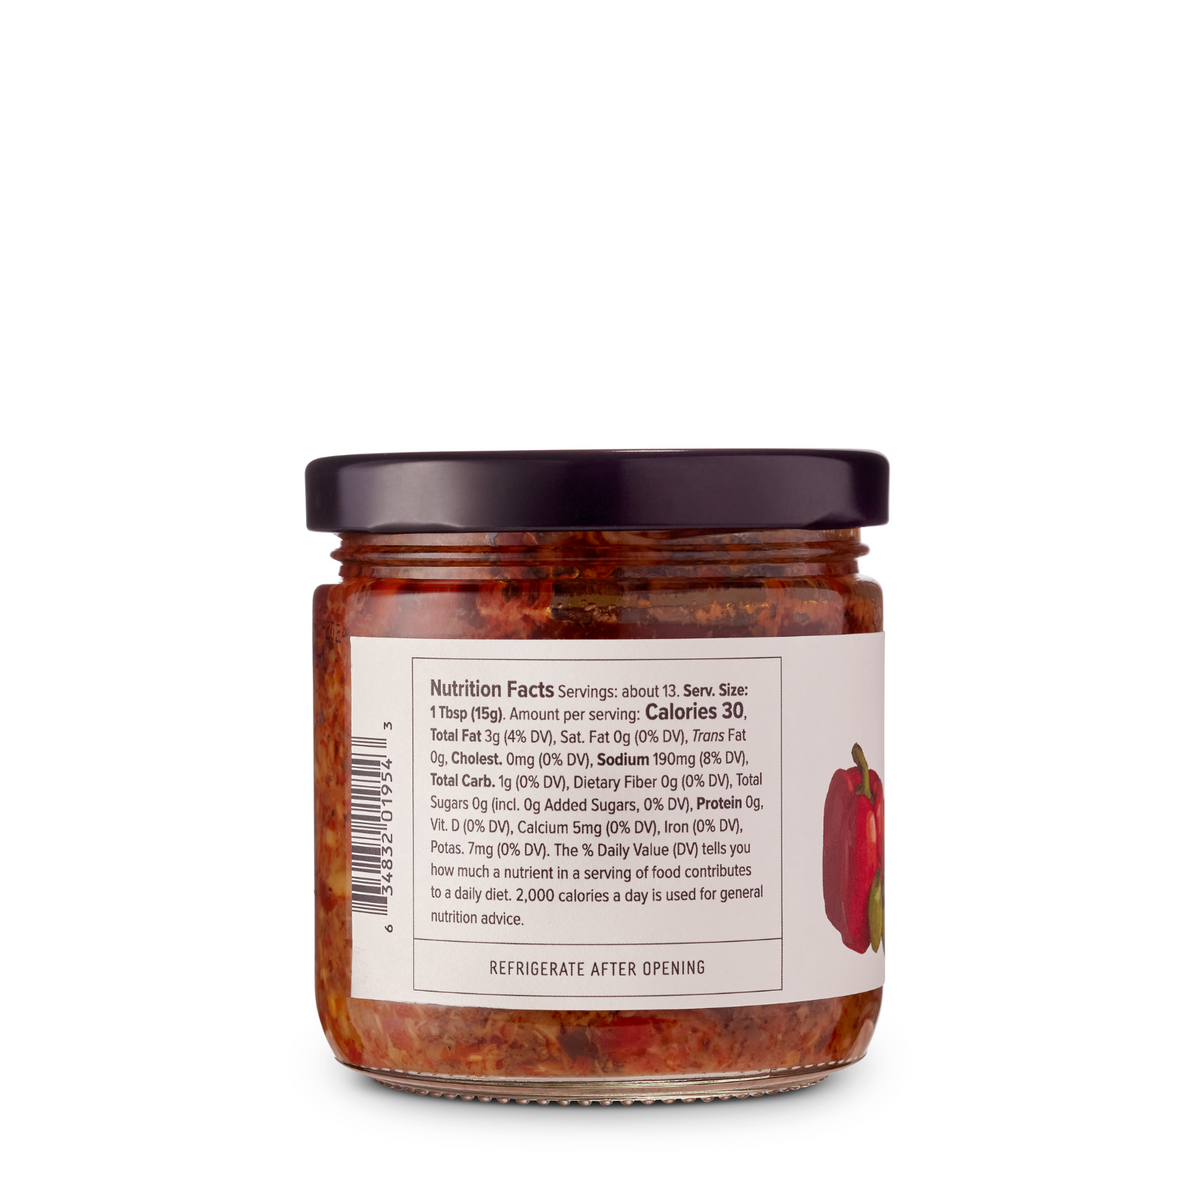 Olive &amp; Roasted Red Pepper Tapenade